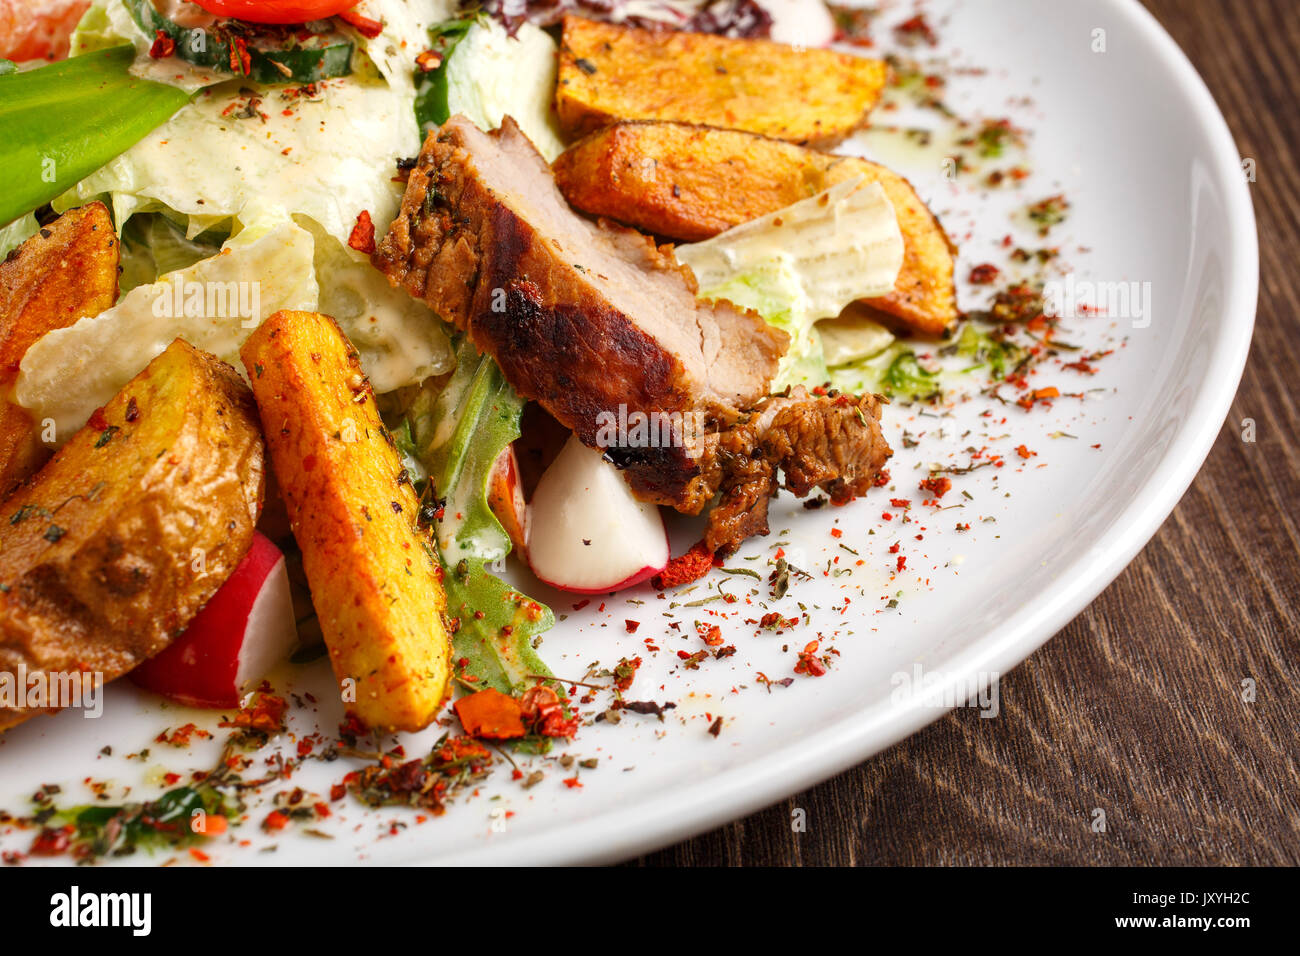 restaurant meals, delicious food, fried foods - salad with fresh vegetables grilled veal and baked potatoes on the plate on a wooden table. Stock Photo